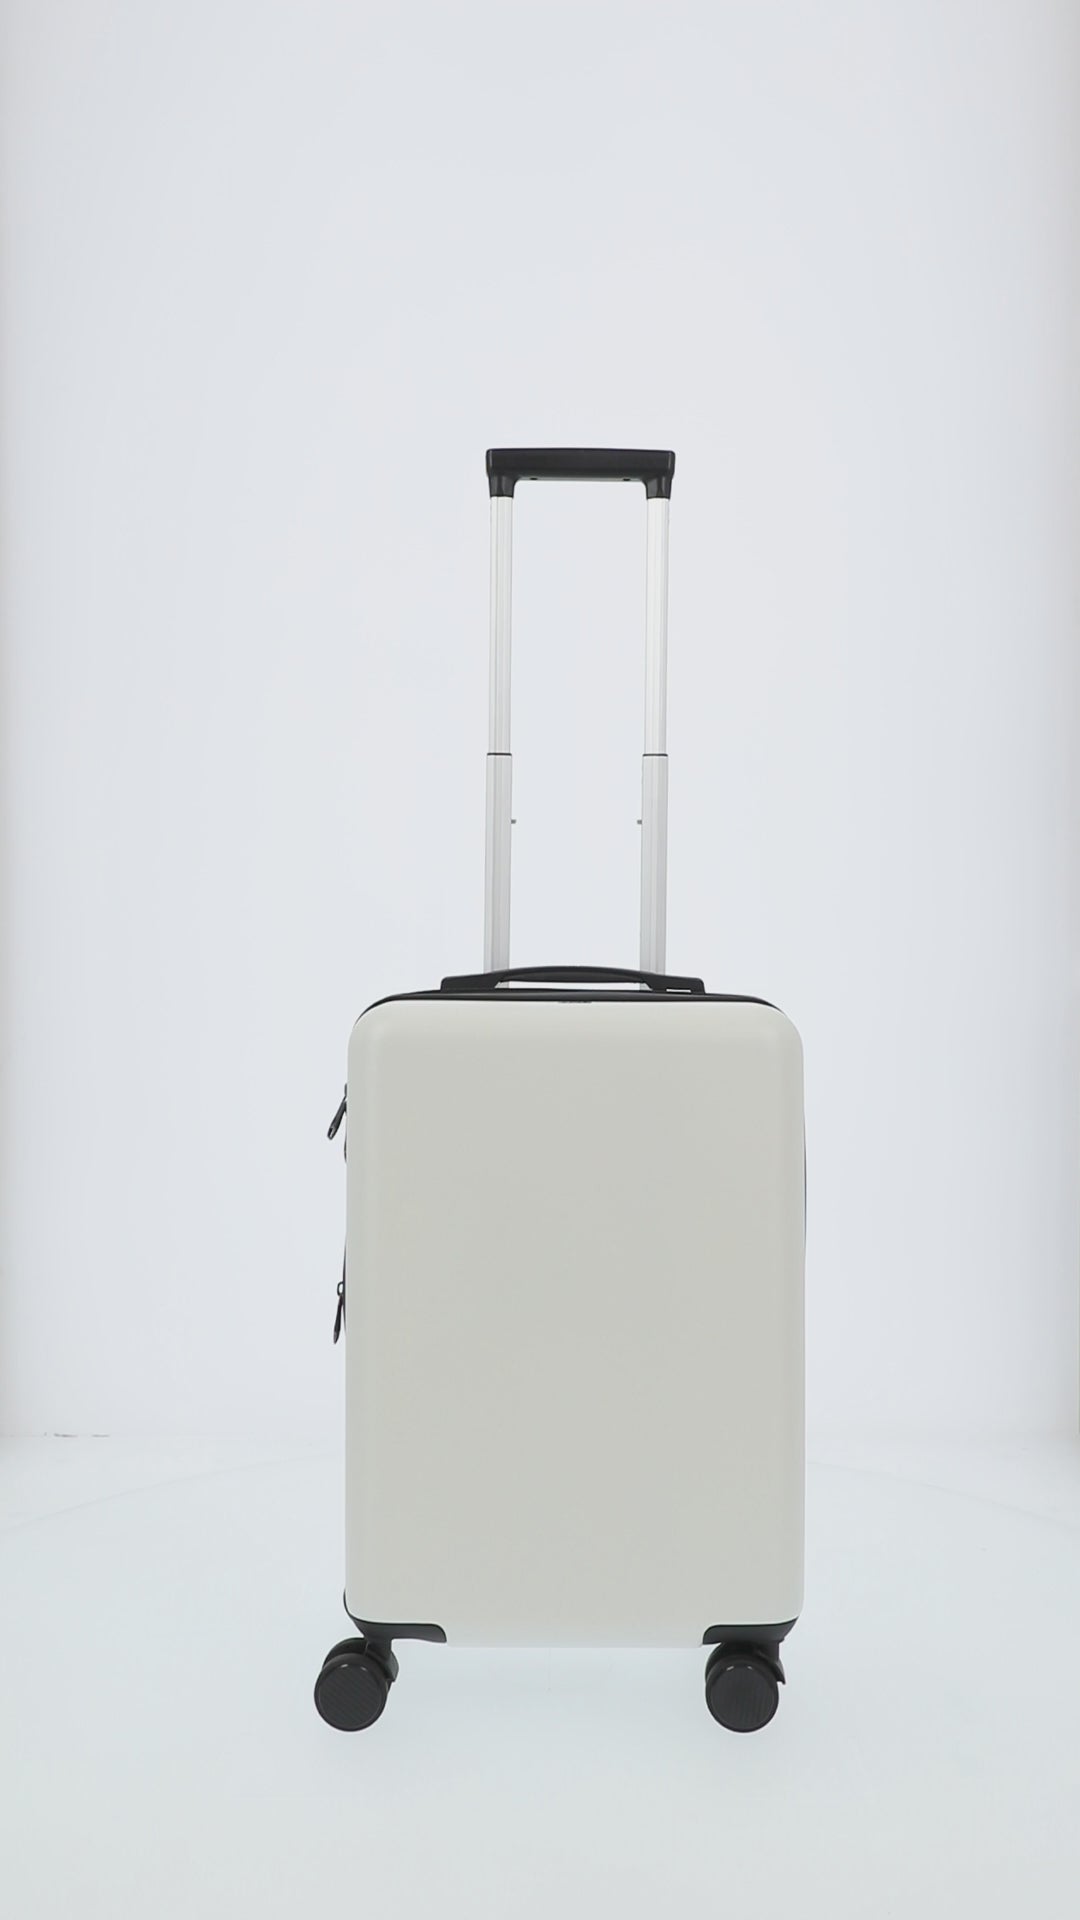 White 22.5" carry-on spinner suitcase luggage by Ful